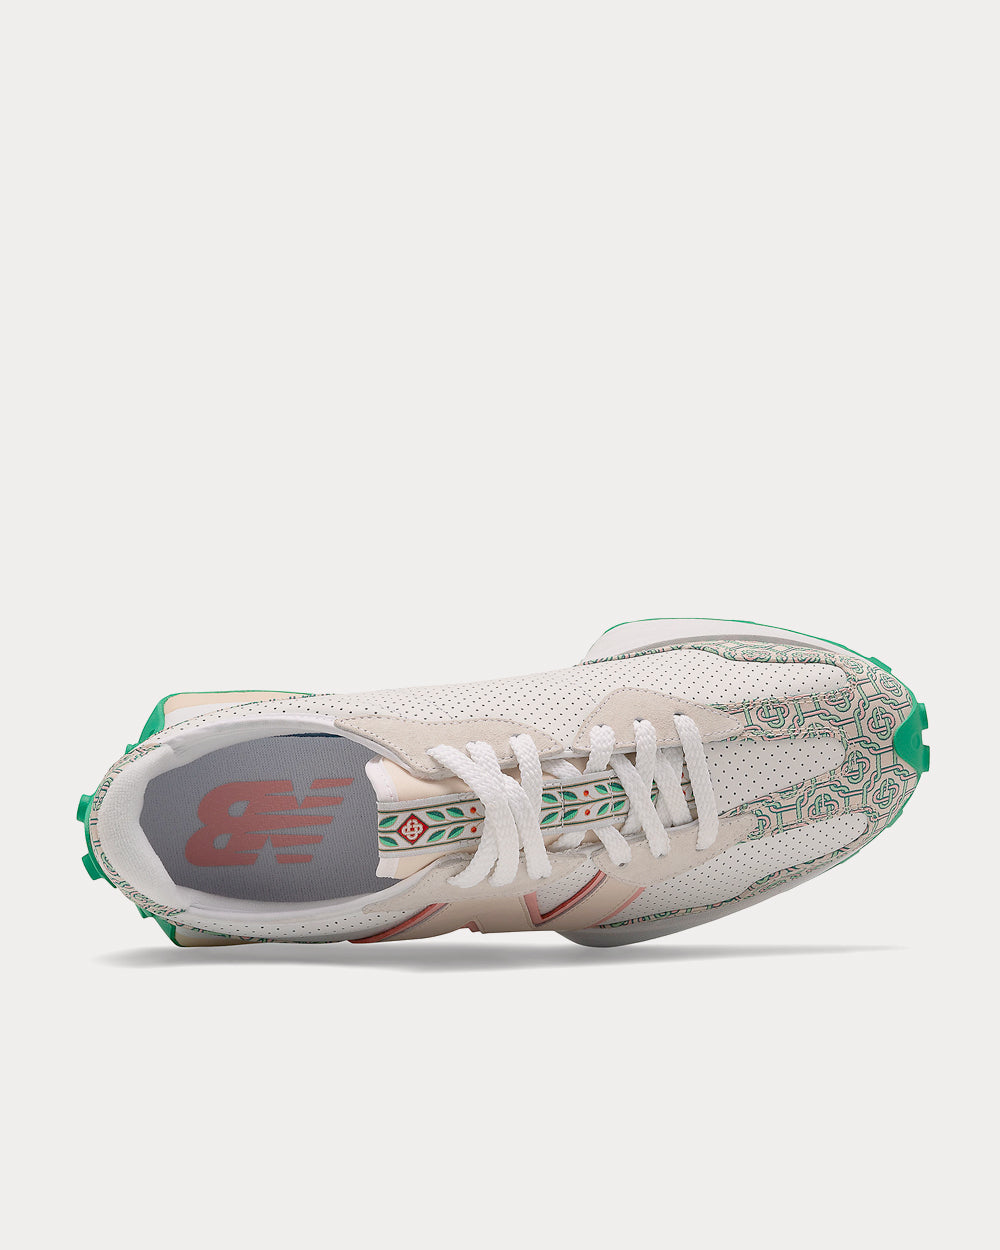 New Balance X Casablanca - 327 Munsell White with Green Low Top Sneakers